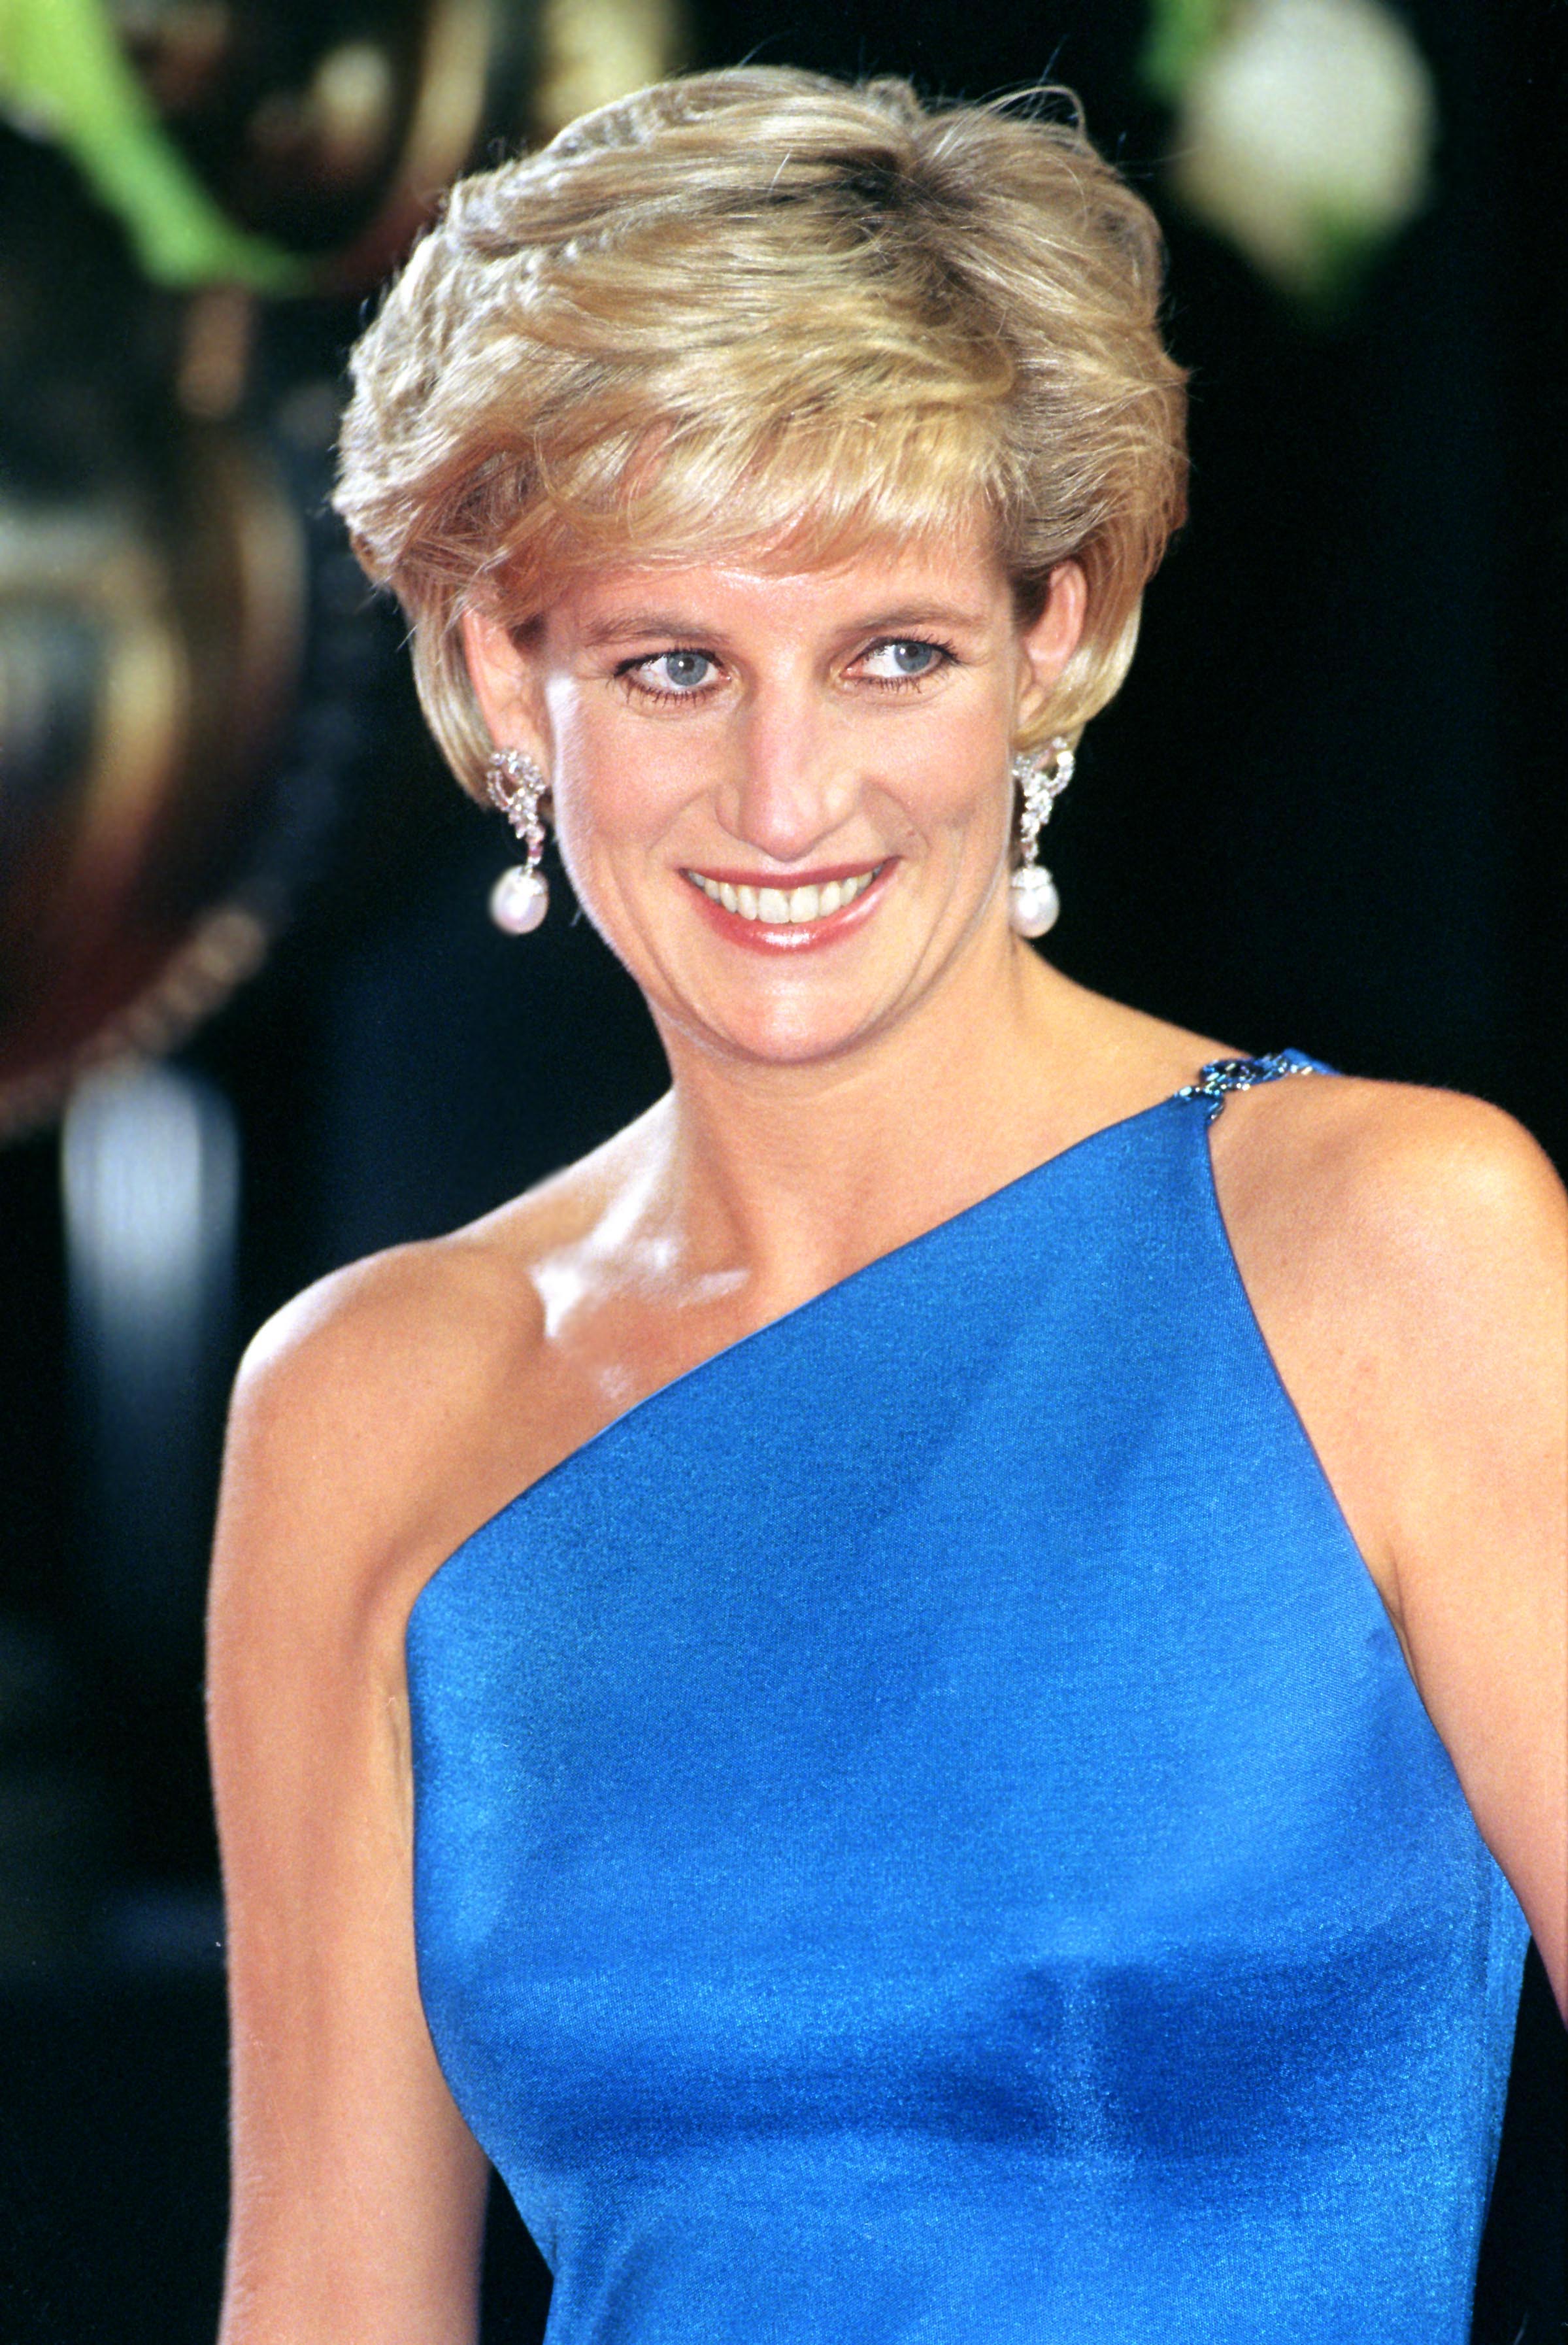 Princess Diana sadly passed away in August 1997